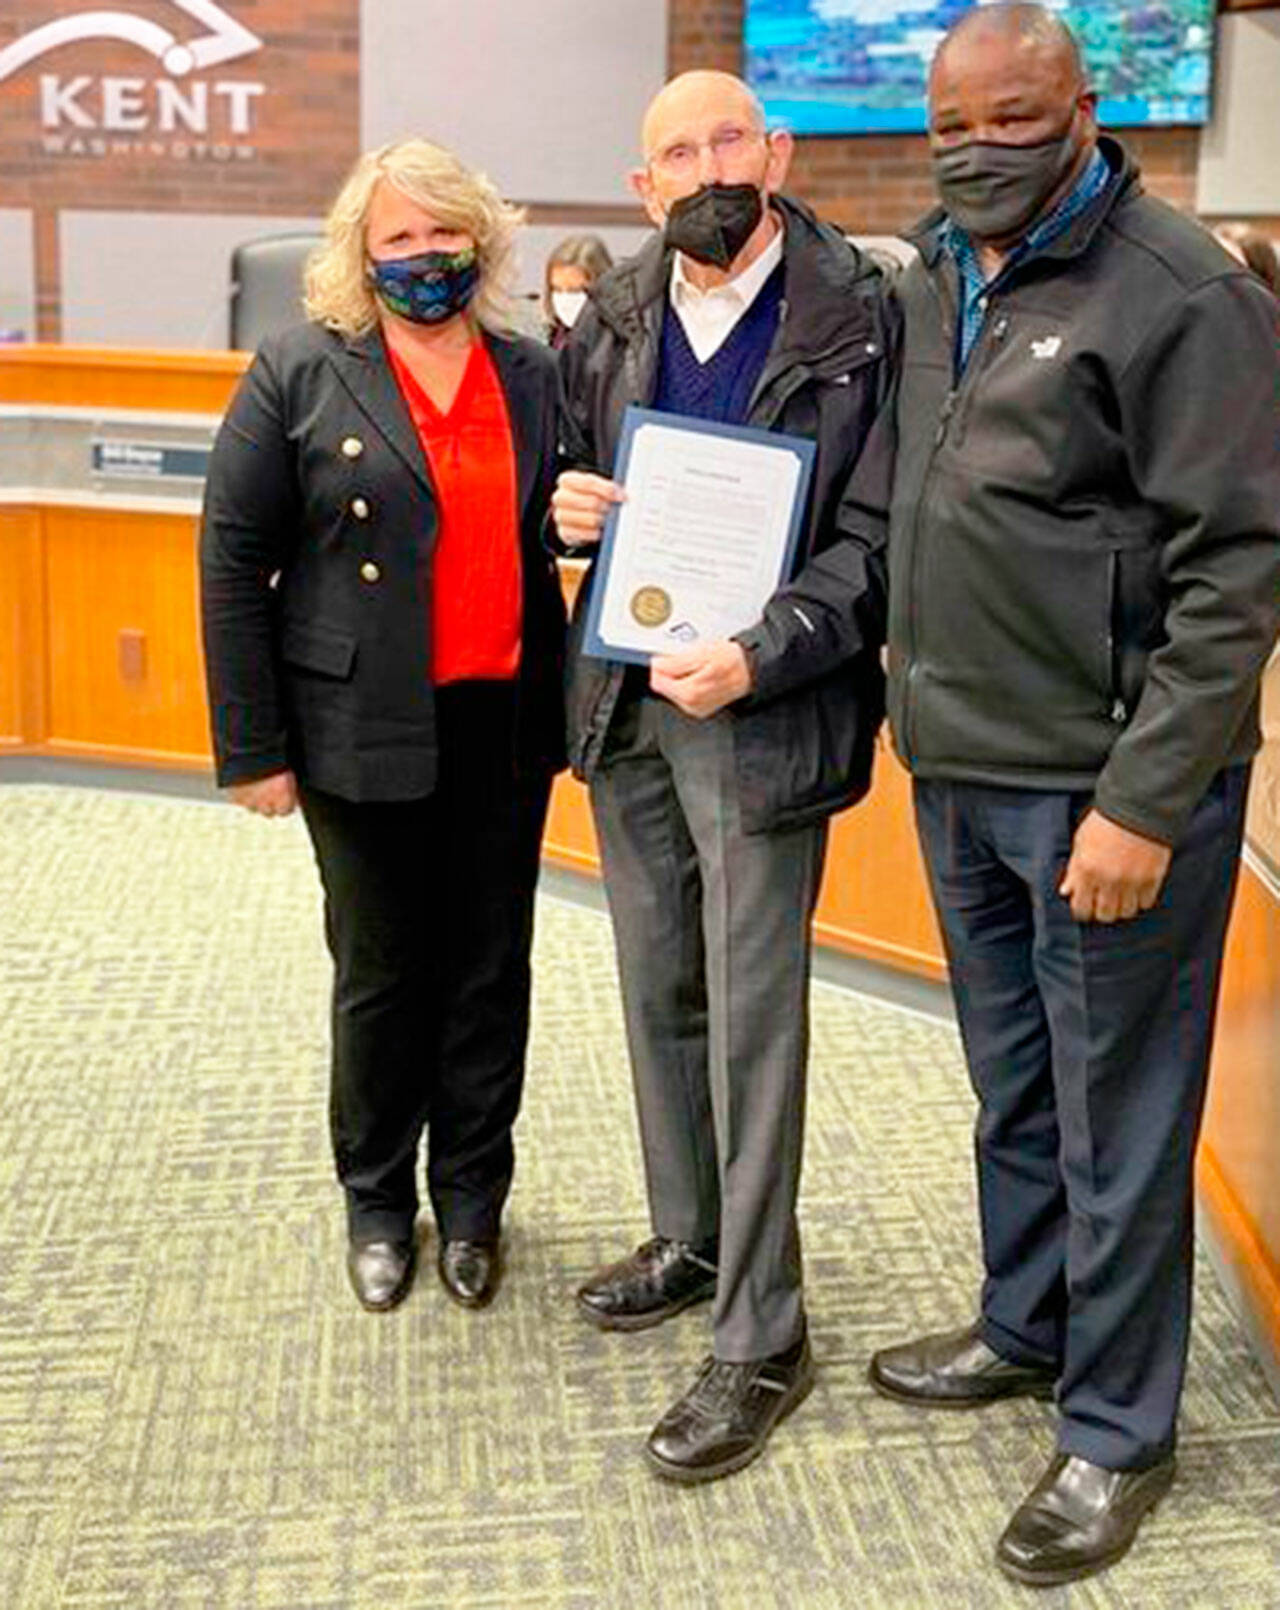 Kent Mayor Dana Ralph, left, and City Councilmember Bill Boyce, right, on Nov. 2 at City Hall present the Marge Williams Day proclamation to Harry Williams, the husband of the late Marge Williams. COURTESY PHOTO, City of Kent